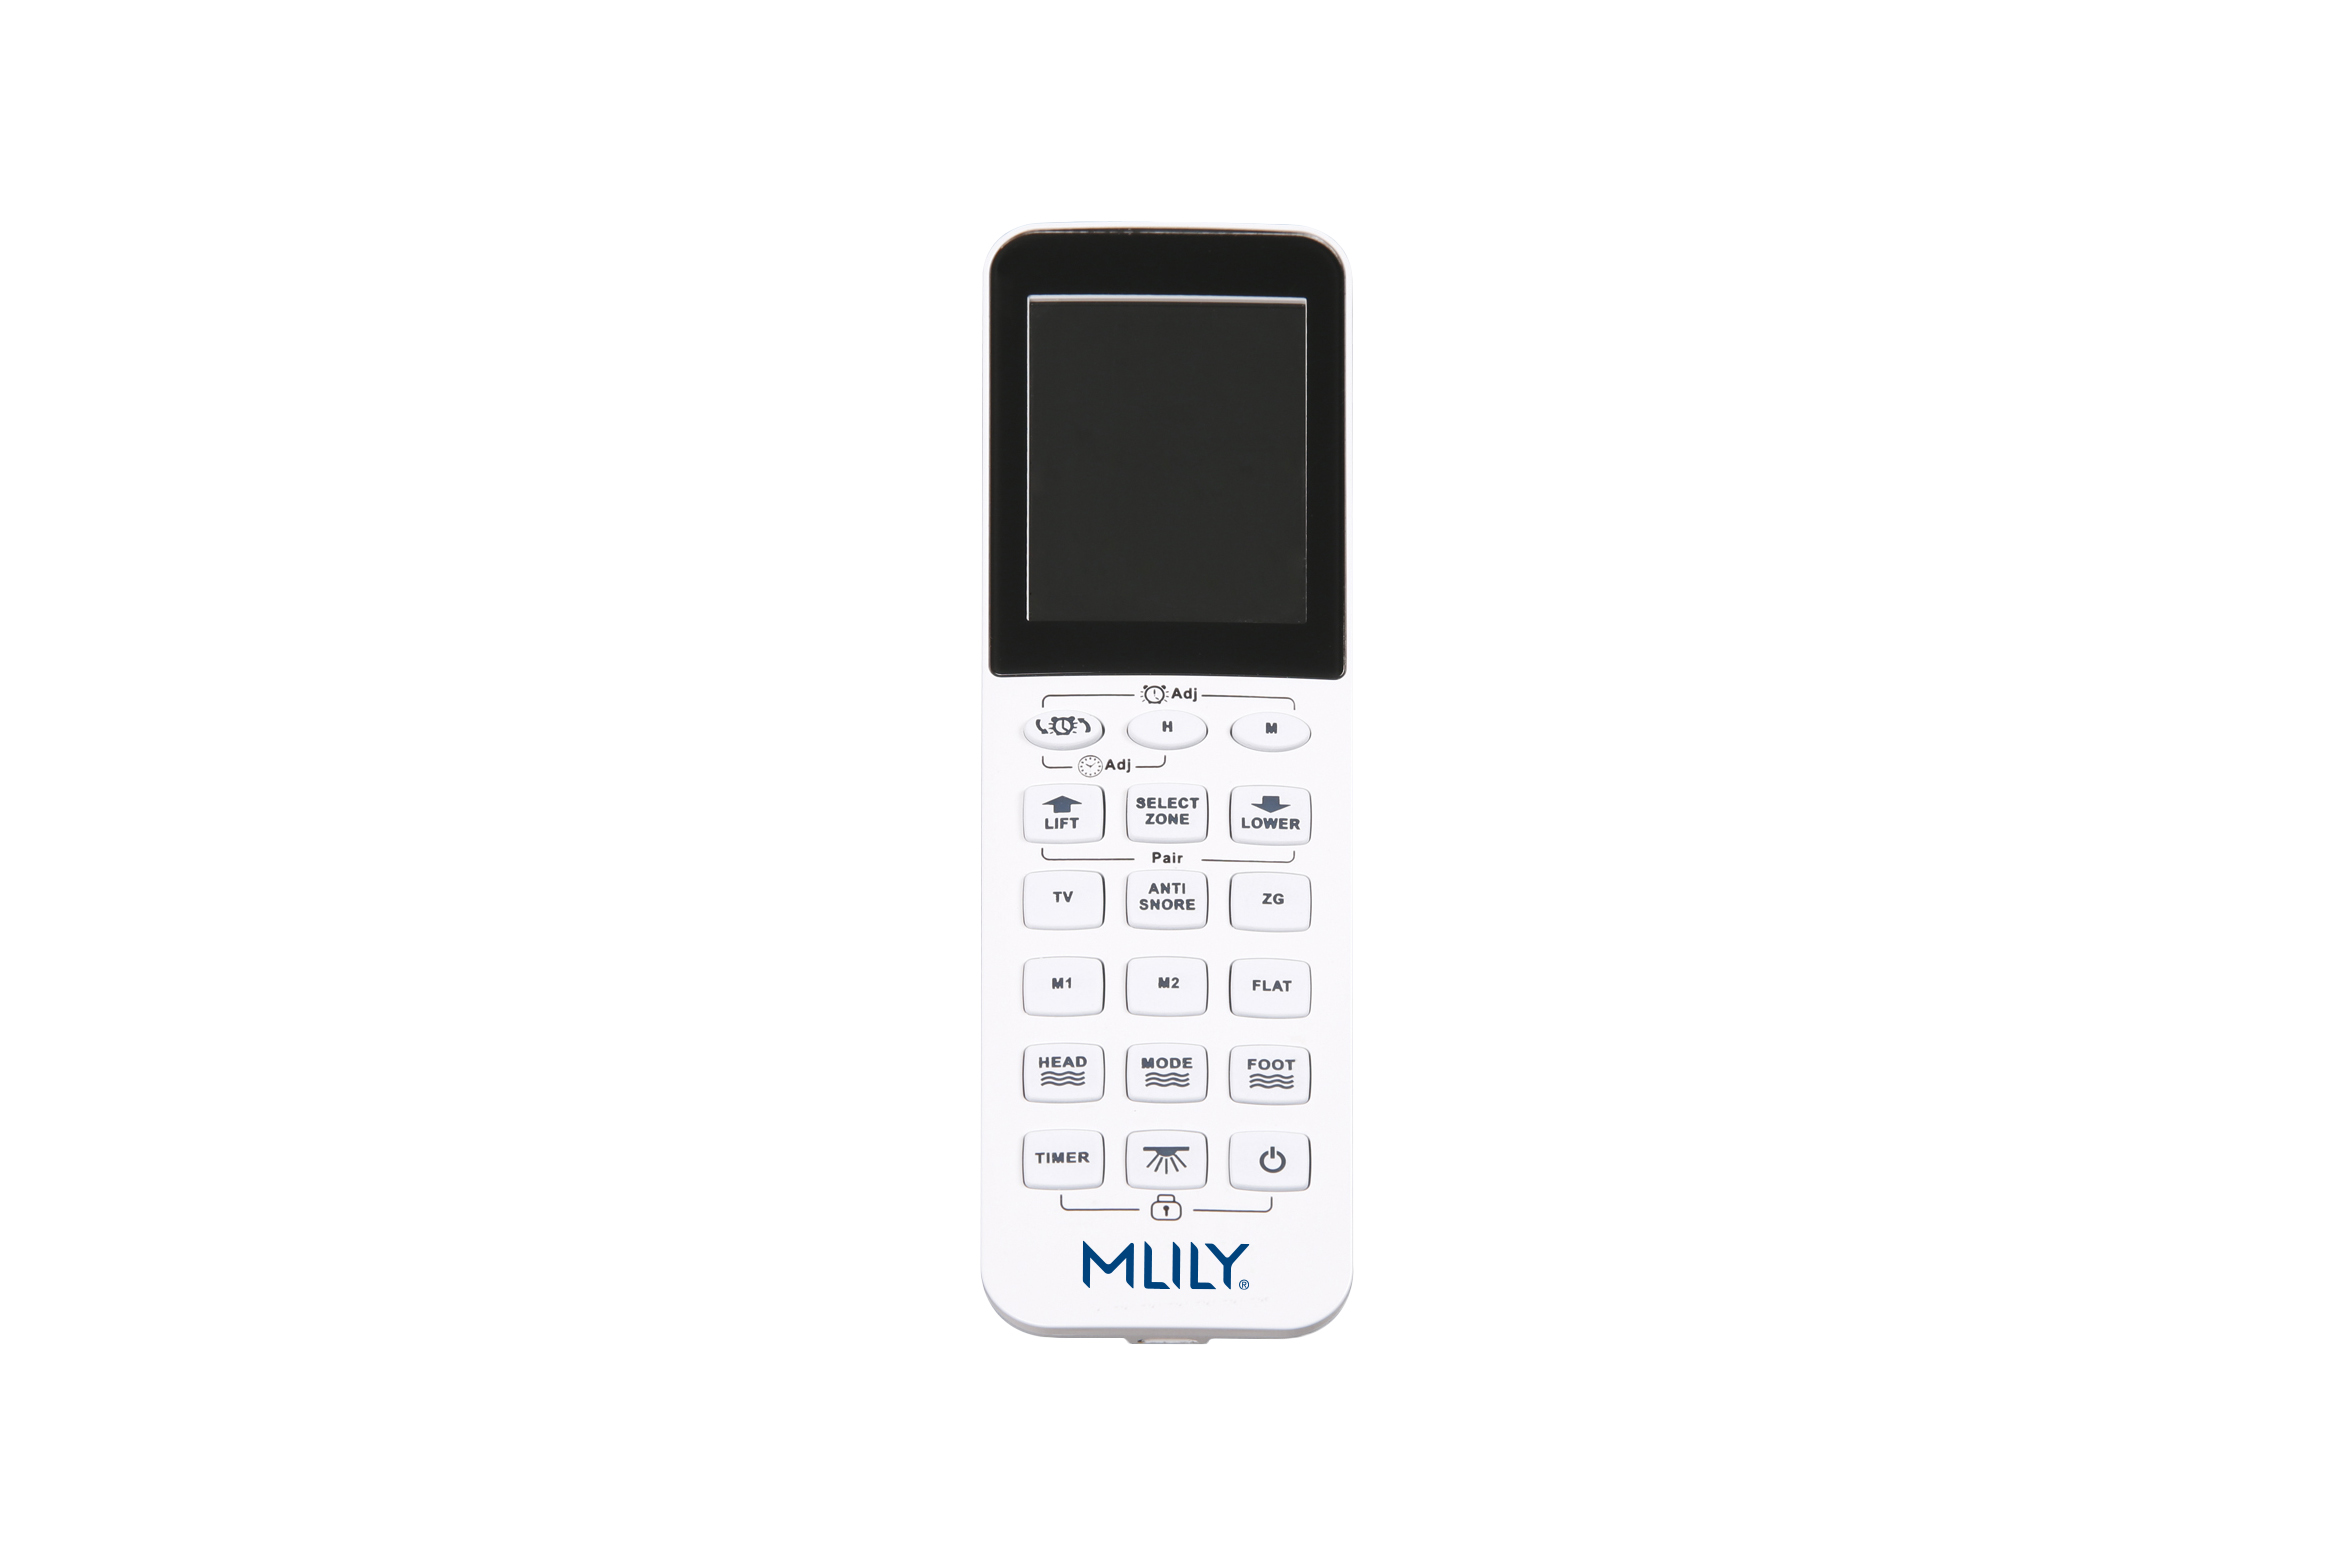 A white NE600S Base wireless remote control with 18 buttons and a blue MLILY logo on the front is pictured against a white background.